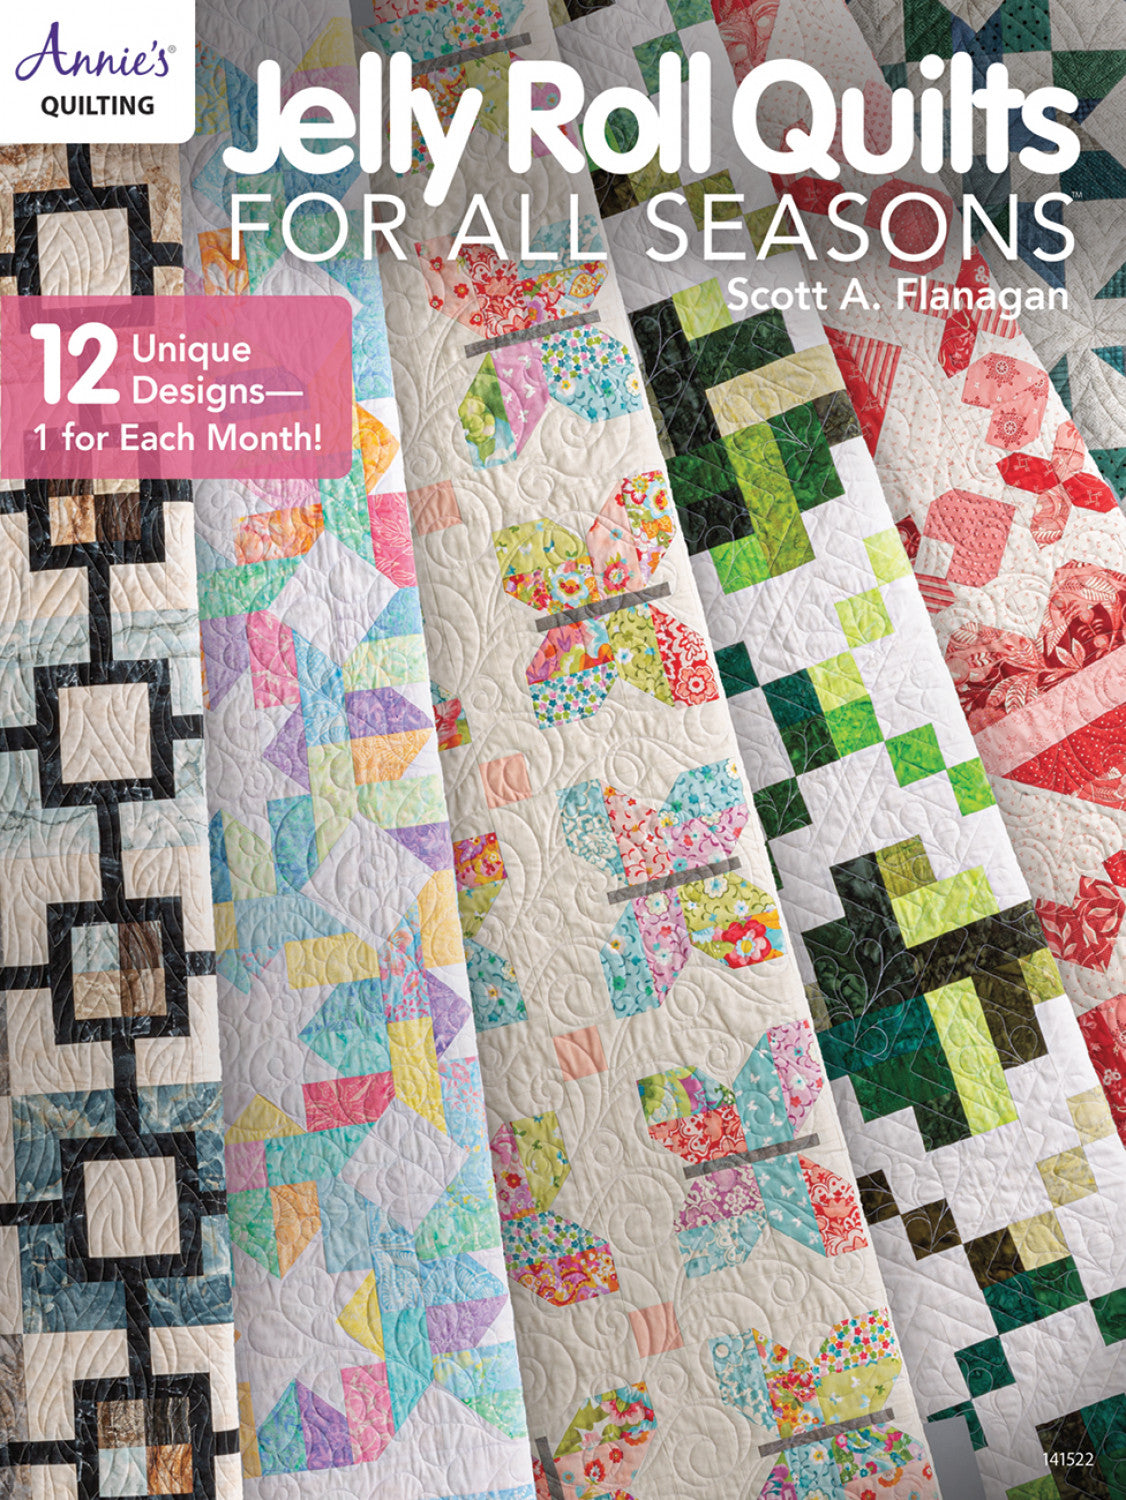 Jelly Roll Quilts for All Seasons - 1415221 - Annie's